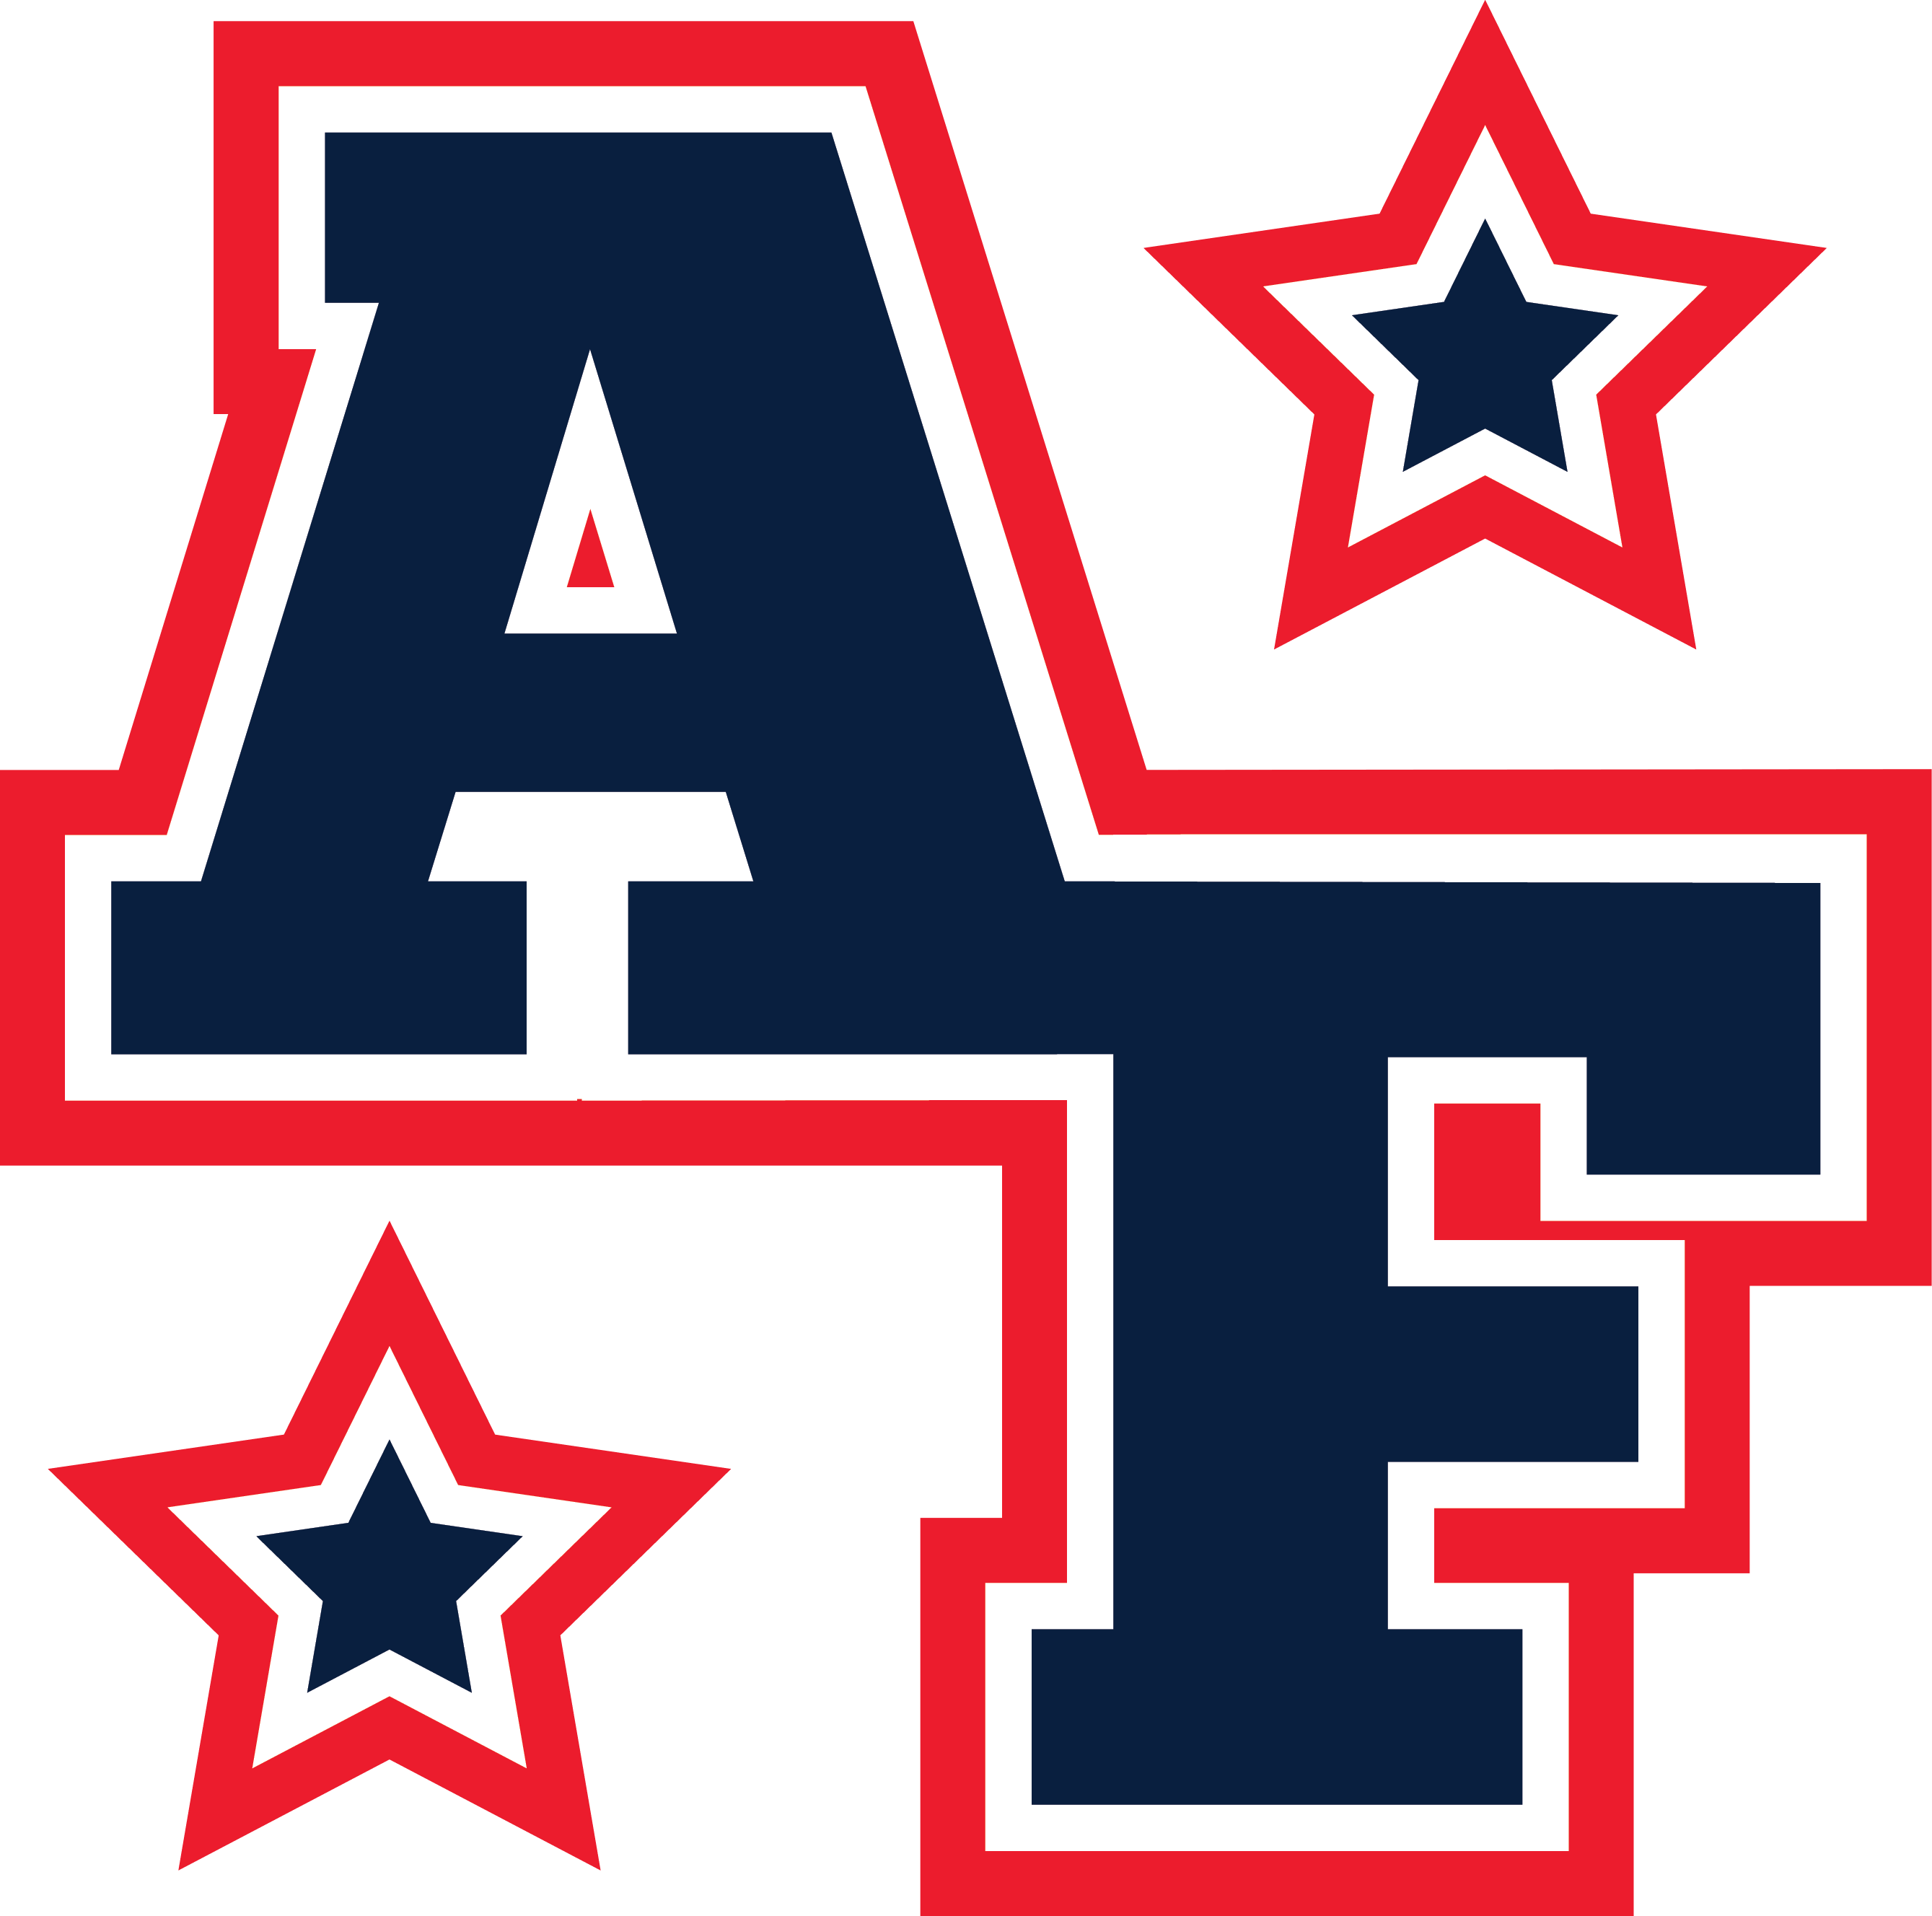 Red and Blue in High School Logo - Apex Friendship High / Homepage